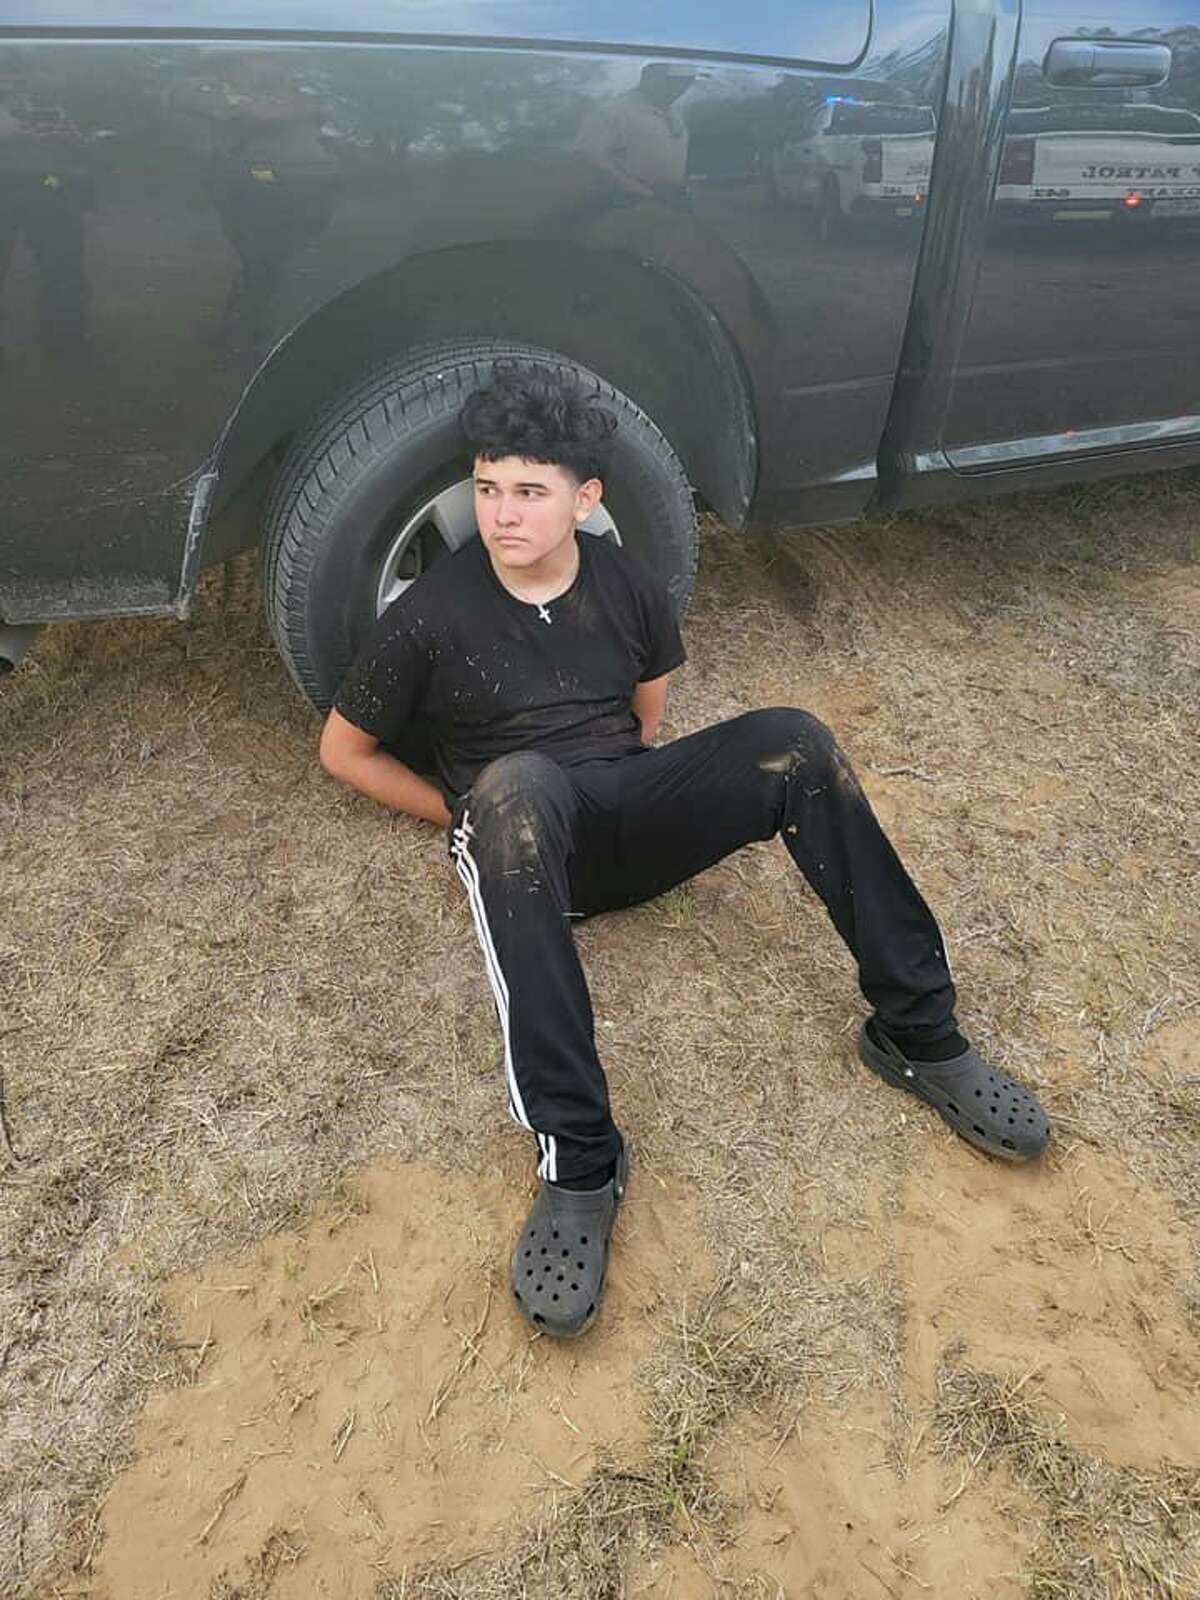 Atascosa County deputies arrested two teens after a lengthy pursuit Monday morning and planned to charge them with human smuggling and evading arrest.